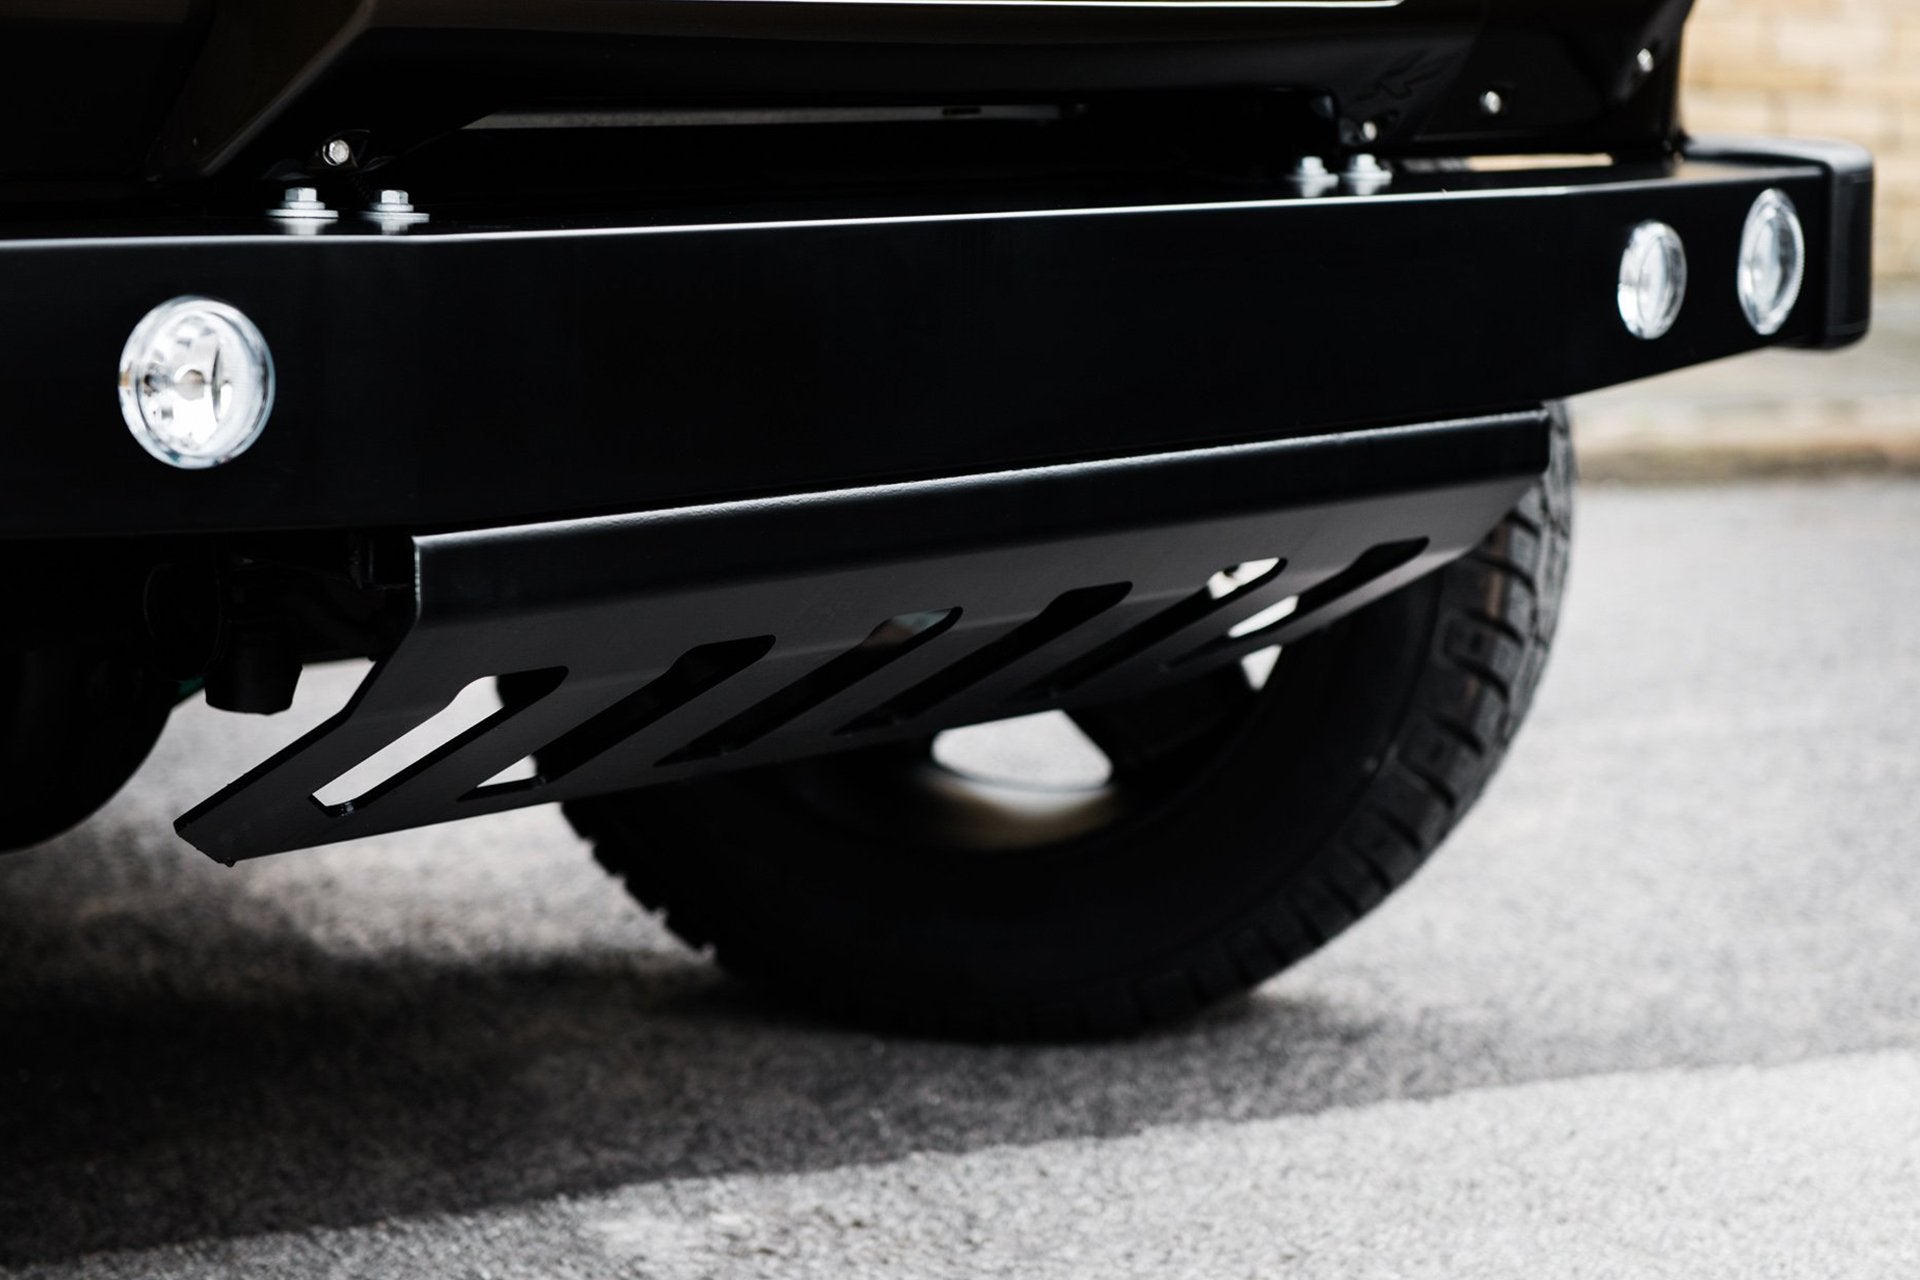 Land Rover Defender 110 (1991-2016) Front Bumper Sump Guard by Chelsea Truck Company - Image 2433